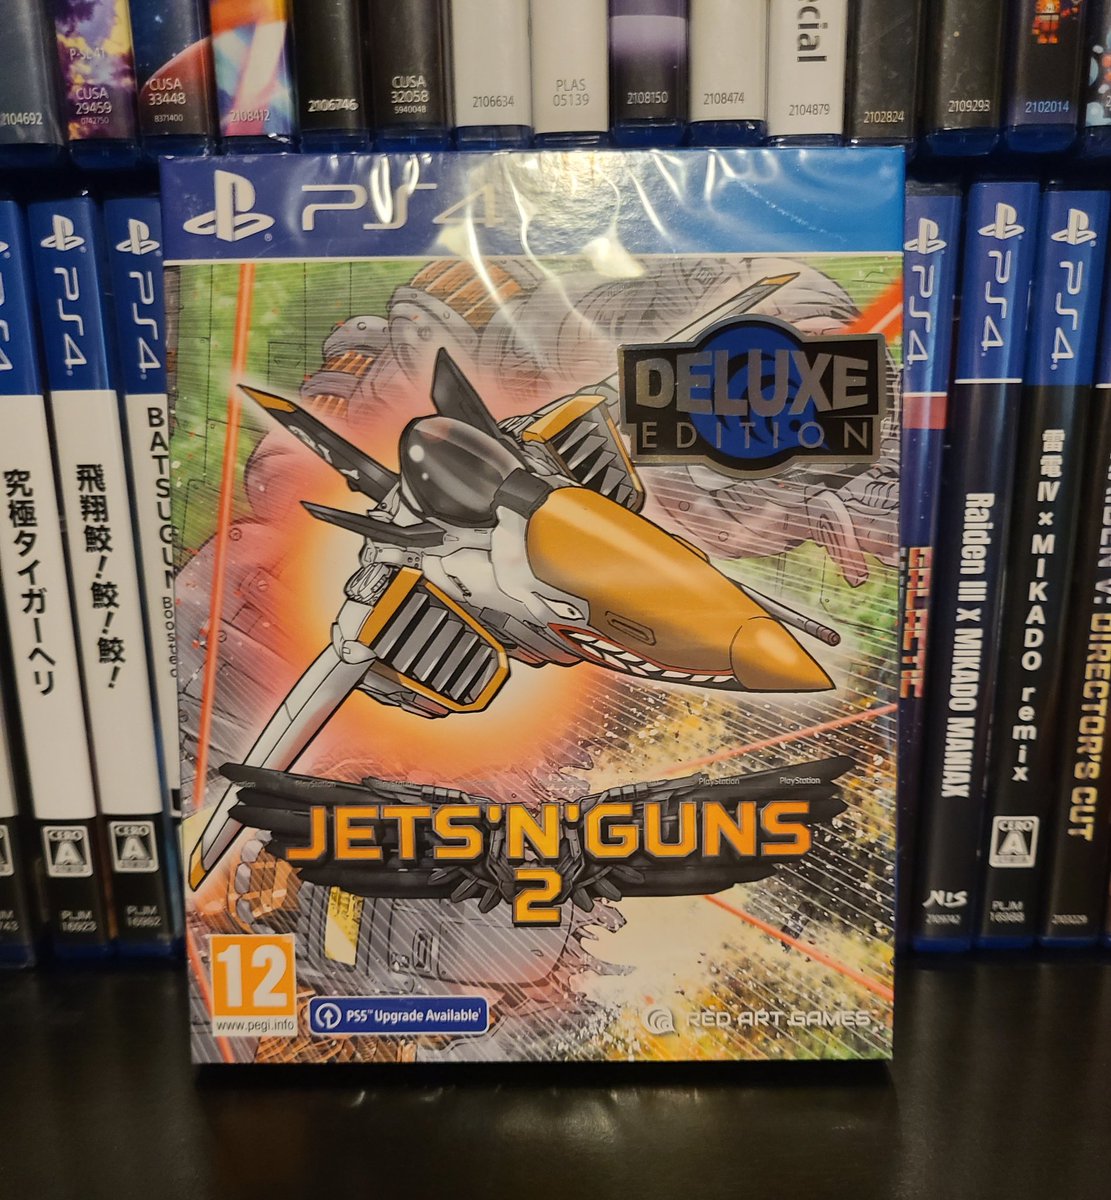 Jets 'n' guns 2. The newest shmup from Red Art Games. The artstyle is gorgeous. Can't wait to try it out!